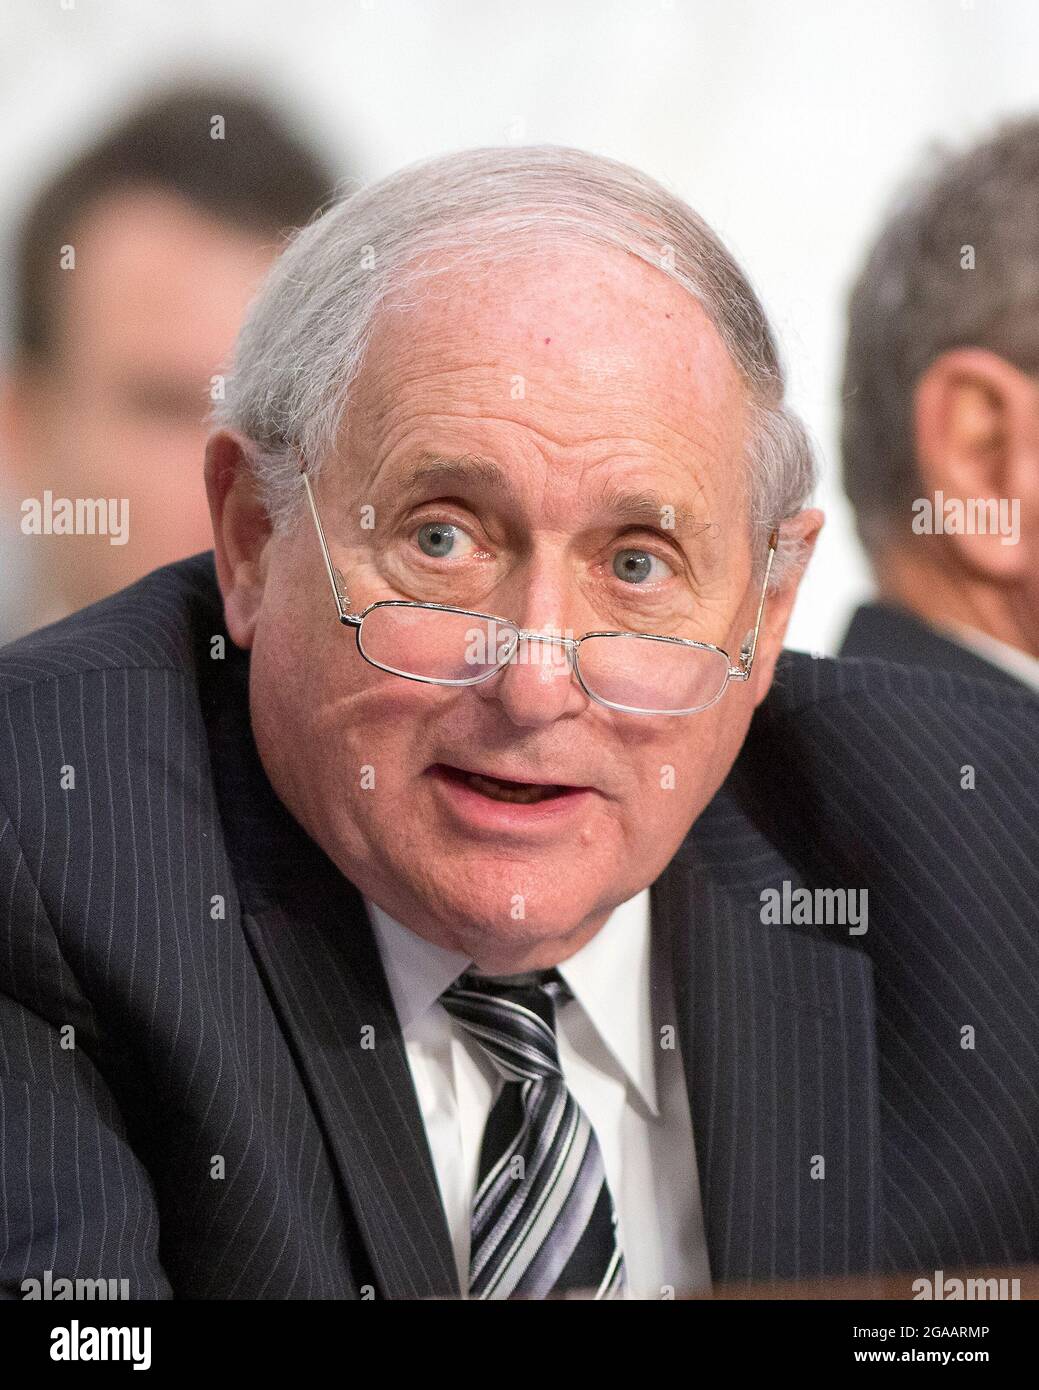 United States Senator Carl Levin (Democrat of Michigan), Chairman, U.S. Senate Committee on Armed Services, makes remarks as U.S. Secretary of Defense Chuck Hagel and Chairman, Joint Chiefs of Staff General Martin E. Dempsey, U.S. Army, deliver testimony before the committee on the U.S. policy towards Iraq and Syria and the threat posed by the Islamic State of Iraq and the Levant (ISIL) in Washington, DC on Tuesday, September 16, 2014.Credit: Ron Sachs/CNP/MediaPunch Stock Photo